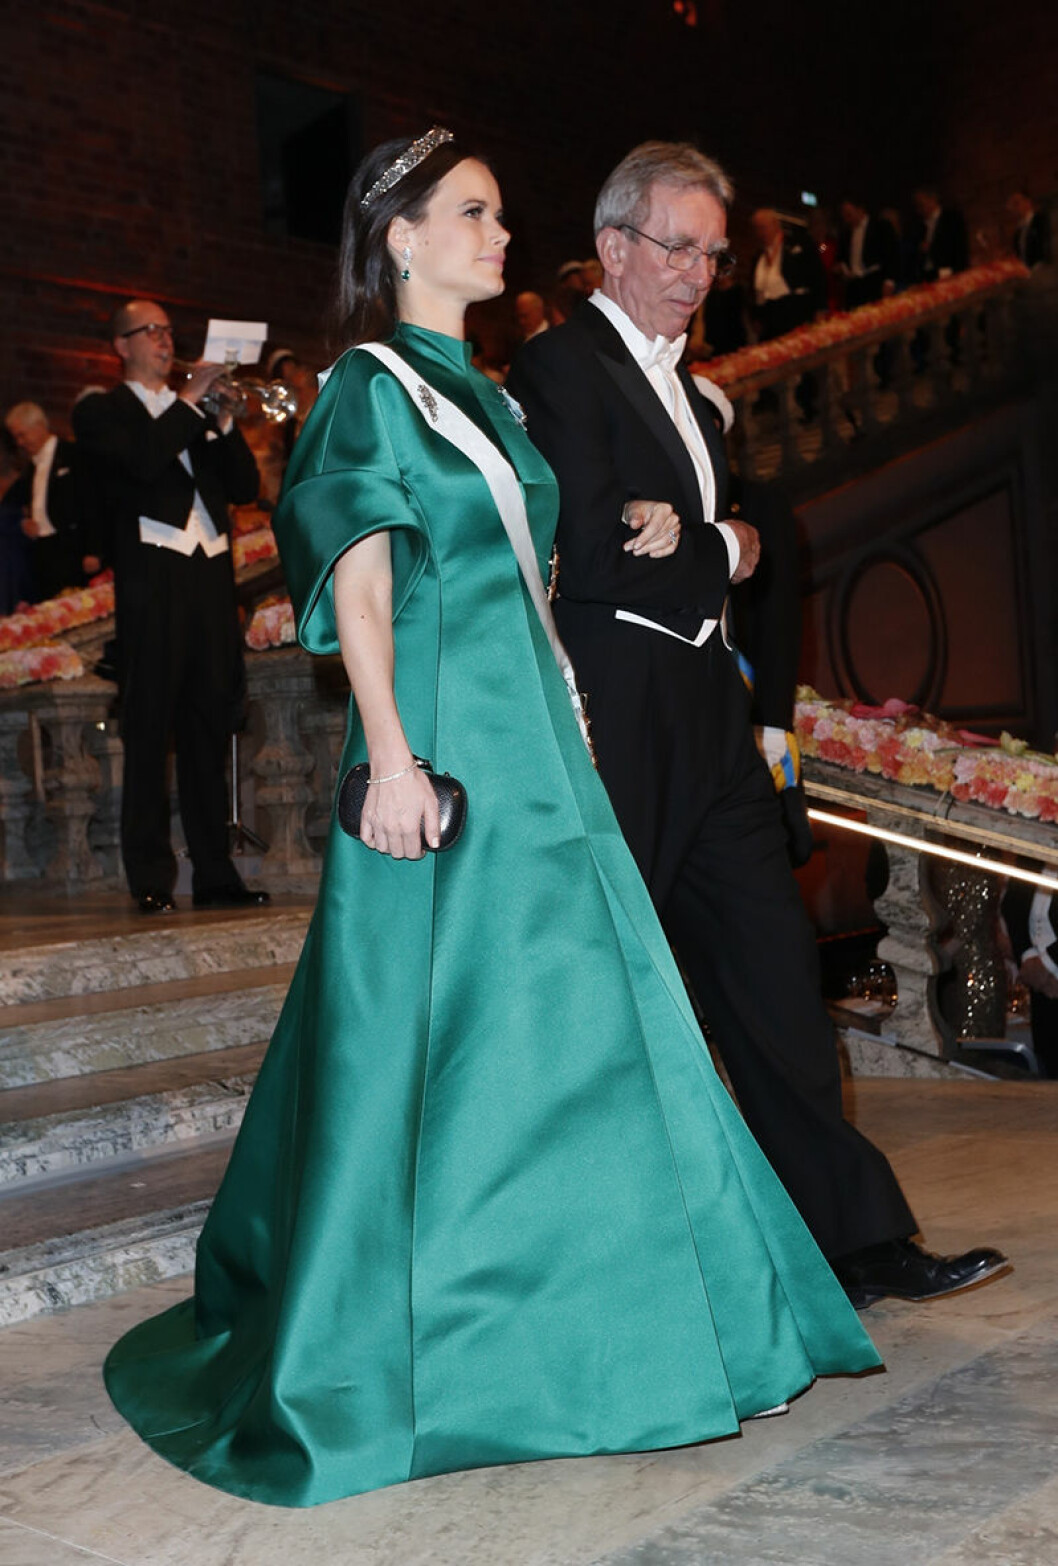 6849536 STOCKHOLM 2016-12-10. The Nobel Prize 2016. The Nobel Banquet held in the Blue Hall of the Stockholm City Hall. Picture shows: Princess Sofia of Sweden. COPYRIGHT STELLA PICTURES